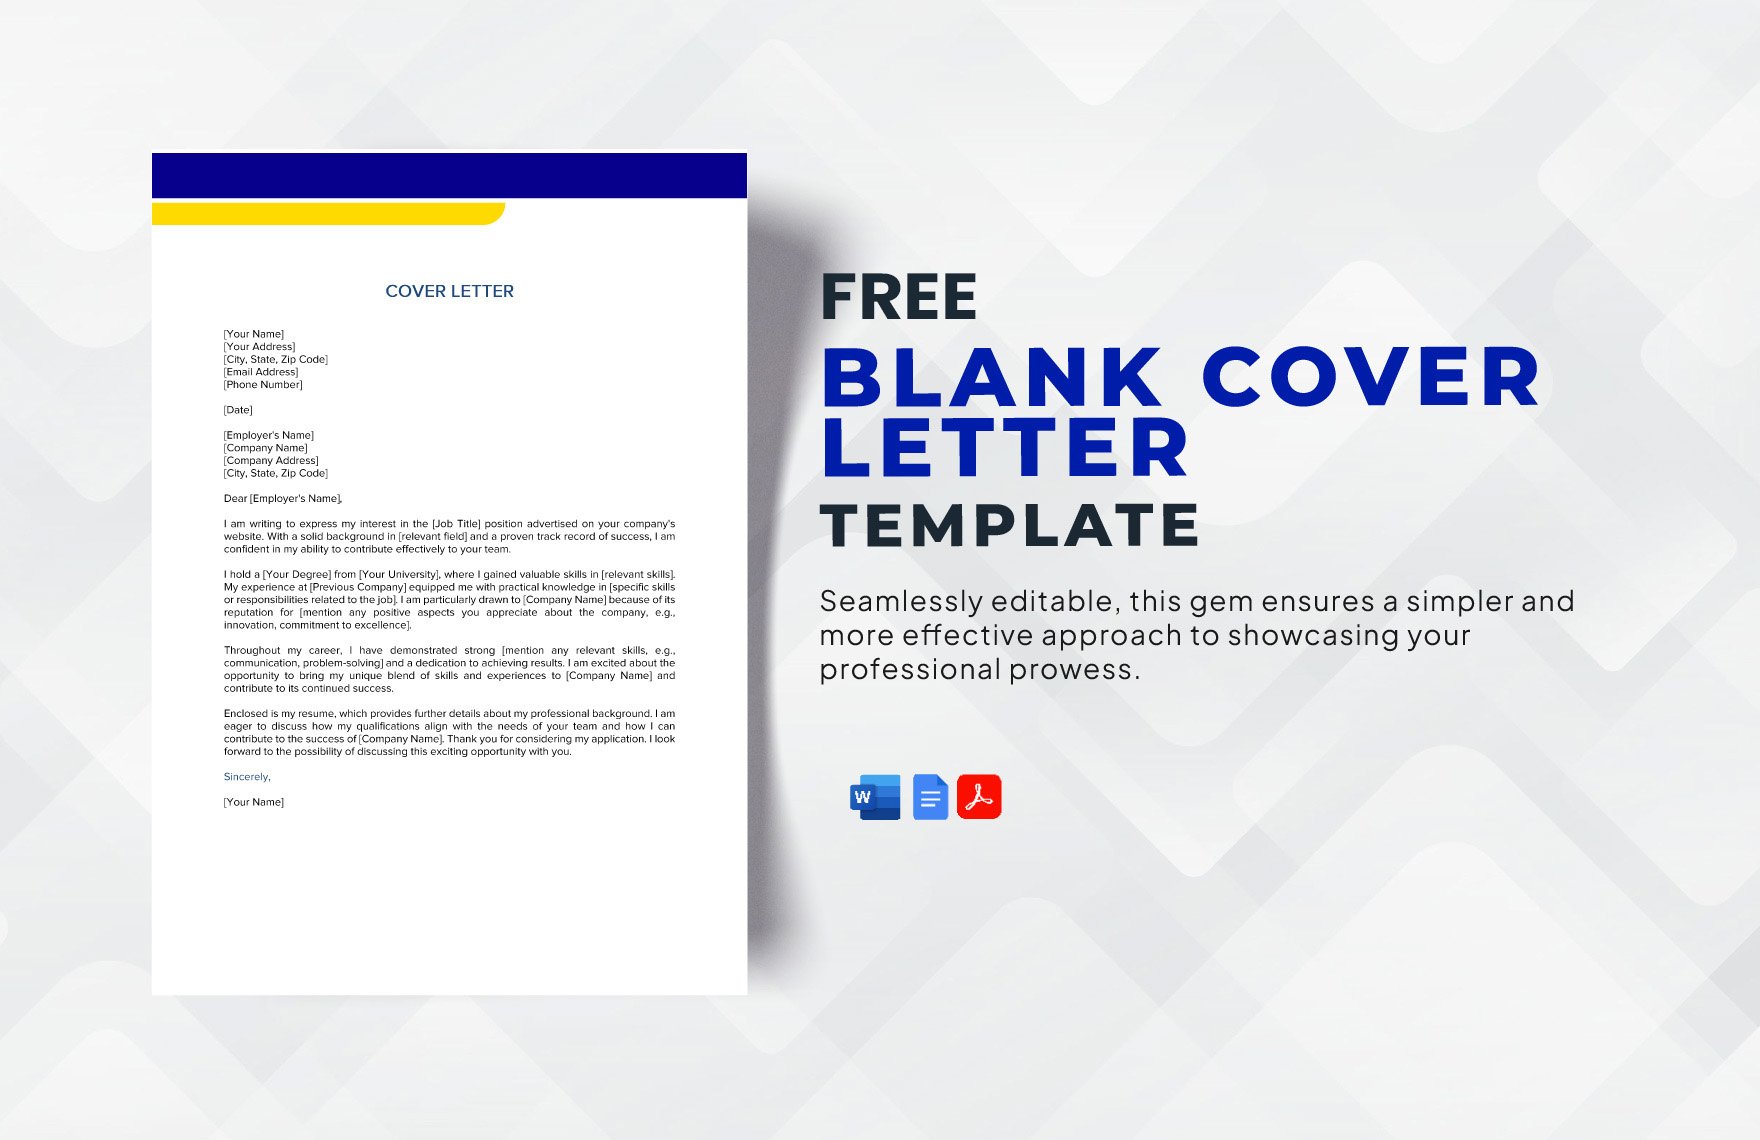 Blank Cover Letter Template in MS Word, Portable Documents, GDocsLink ...